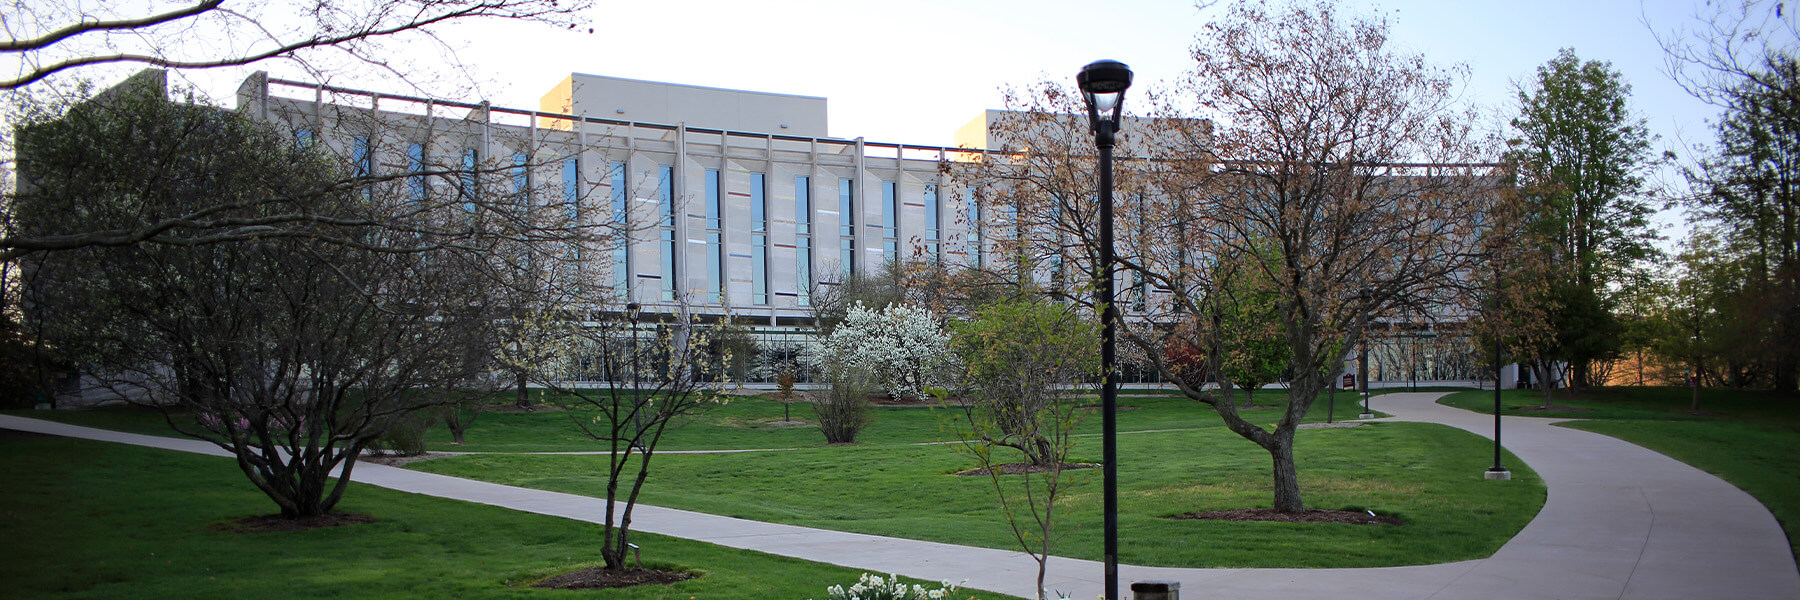 The Global and International Studies Building.